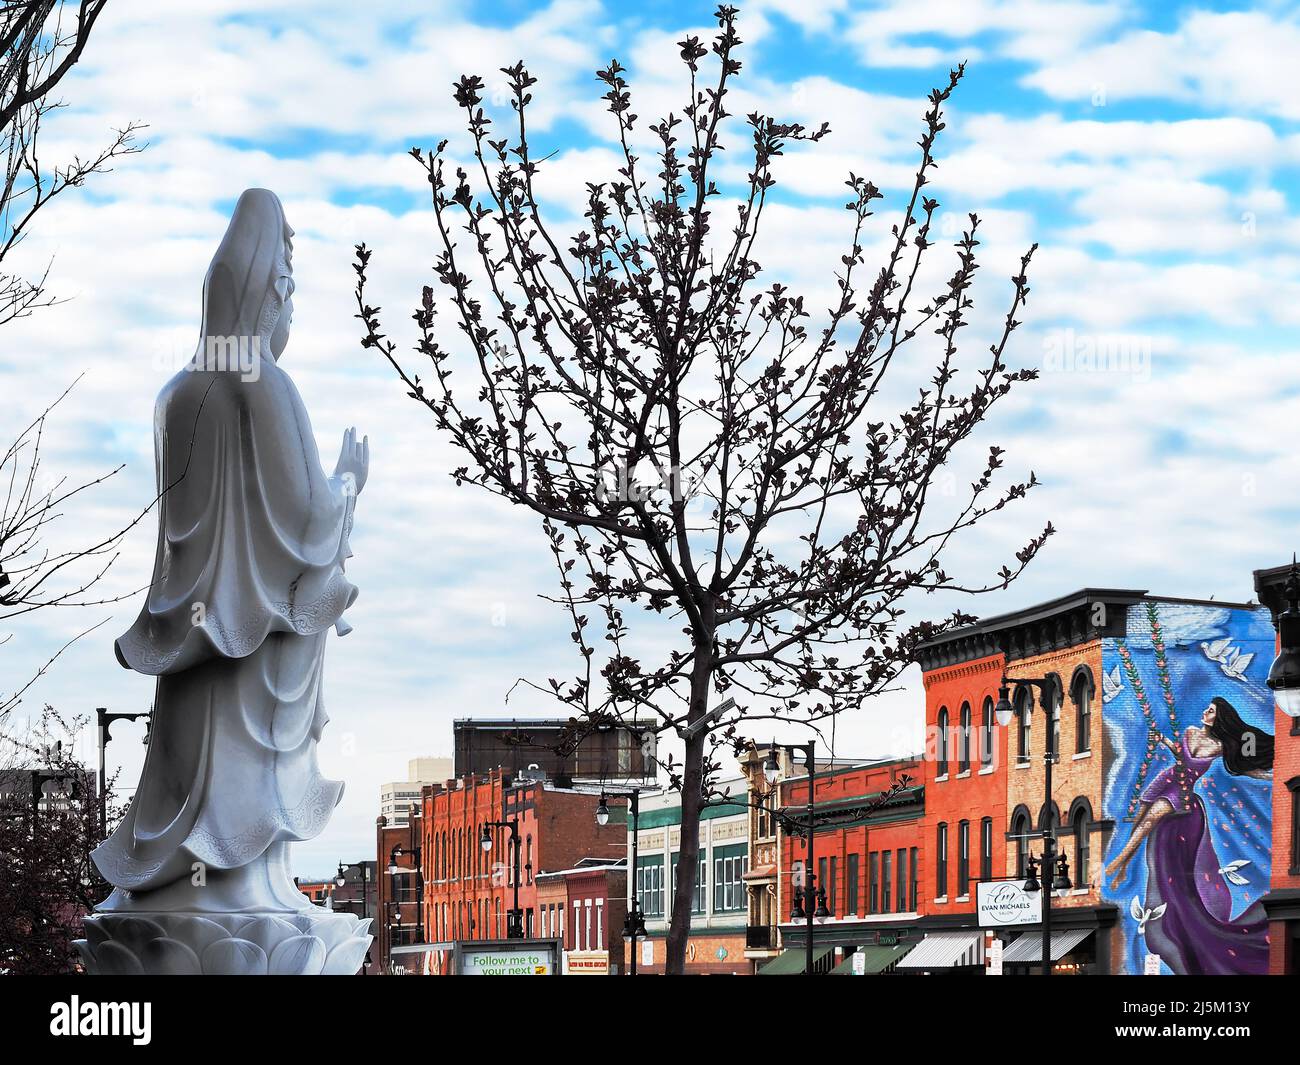 Syracuse, New York, USA. April 23, 2022. View from the grounds of the Ngoc Duyen Buddhist Temple in the historic northside neighborhood of Syracuse lo Stock Photo